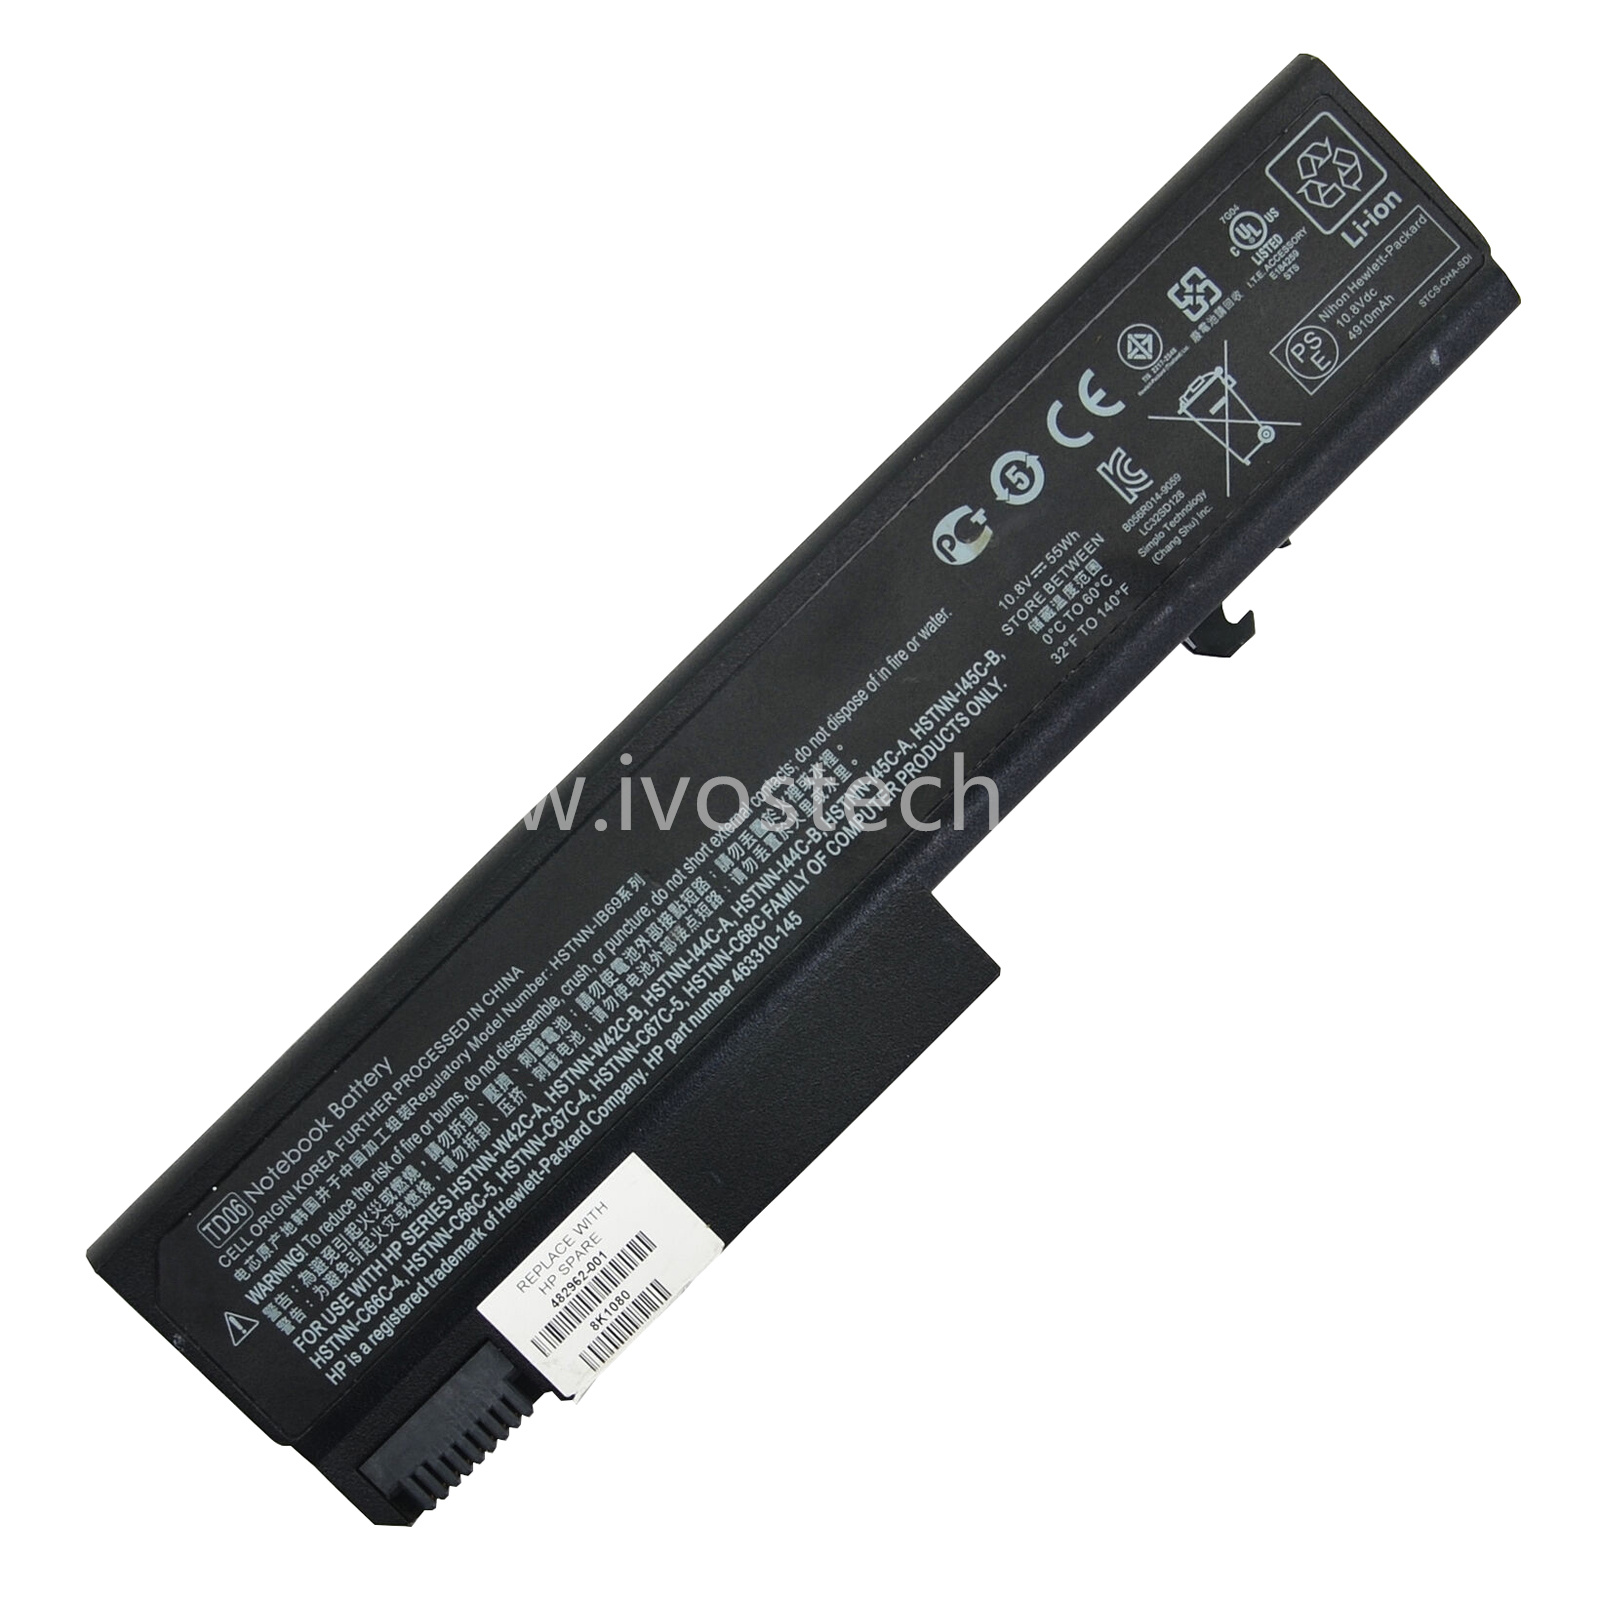 TD06 55Wh 10.8V Replacement Laptop Battery for HP EliteBook 8440P 6930P 6530B 6730B ProBook 6455B Series